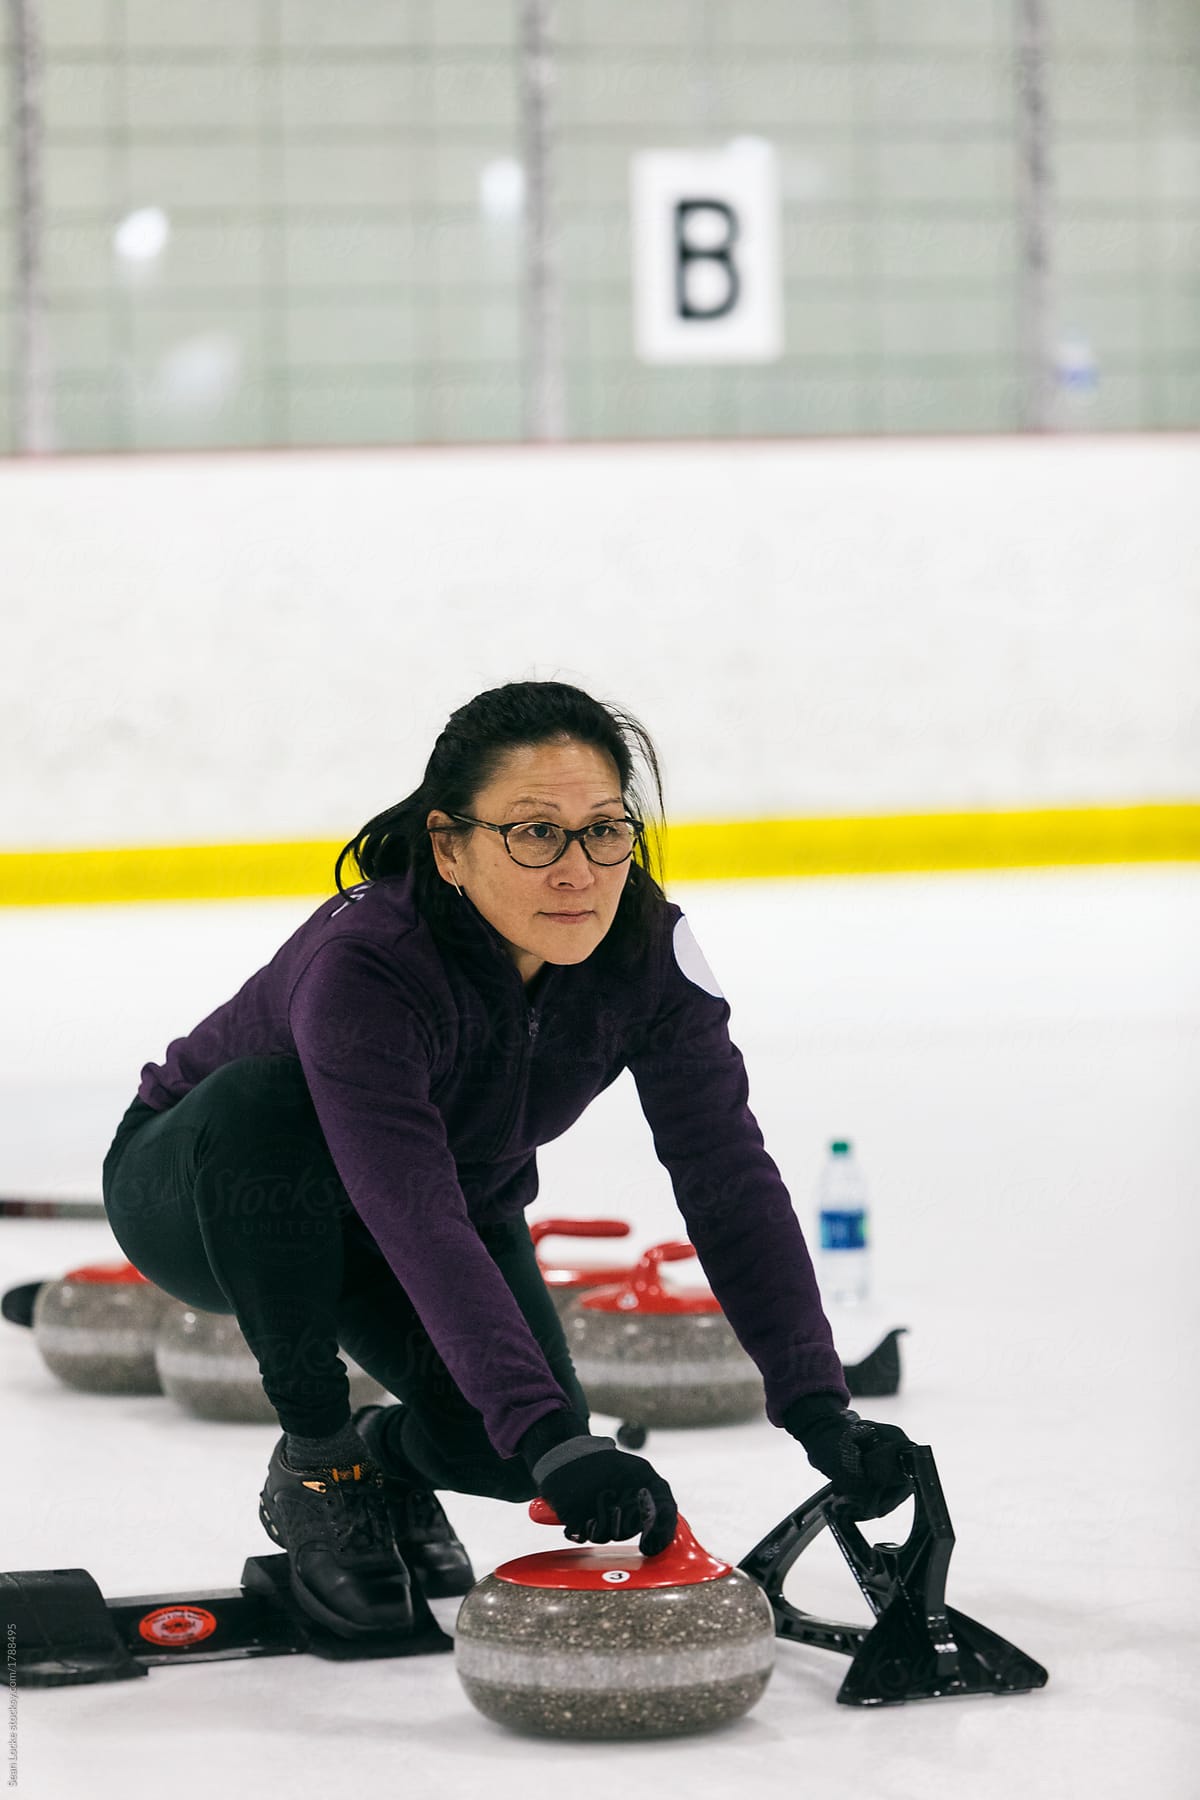 Curling: Woman Ready To Throw Stone